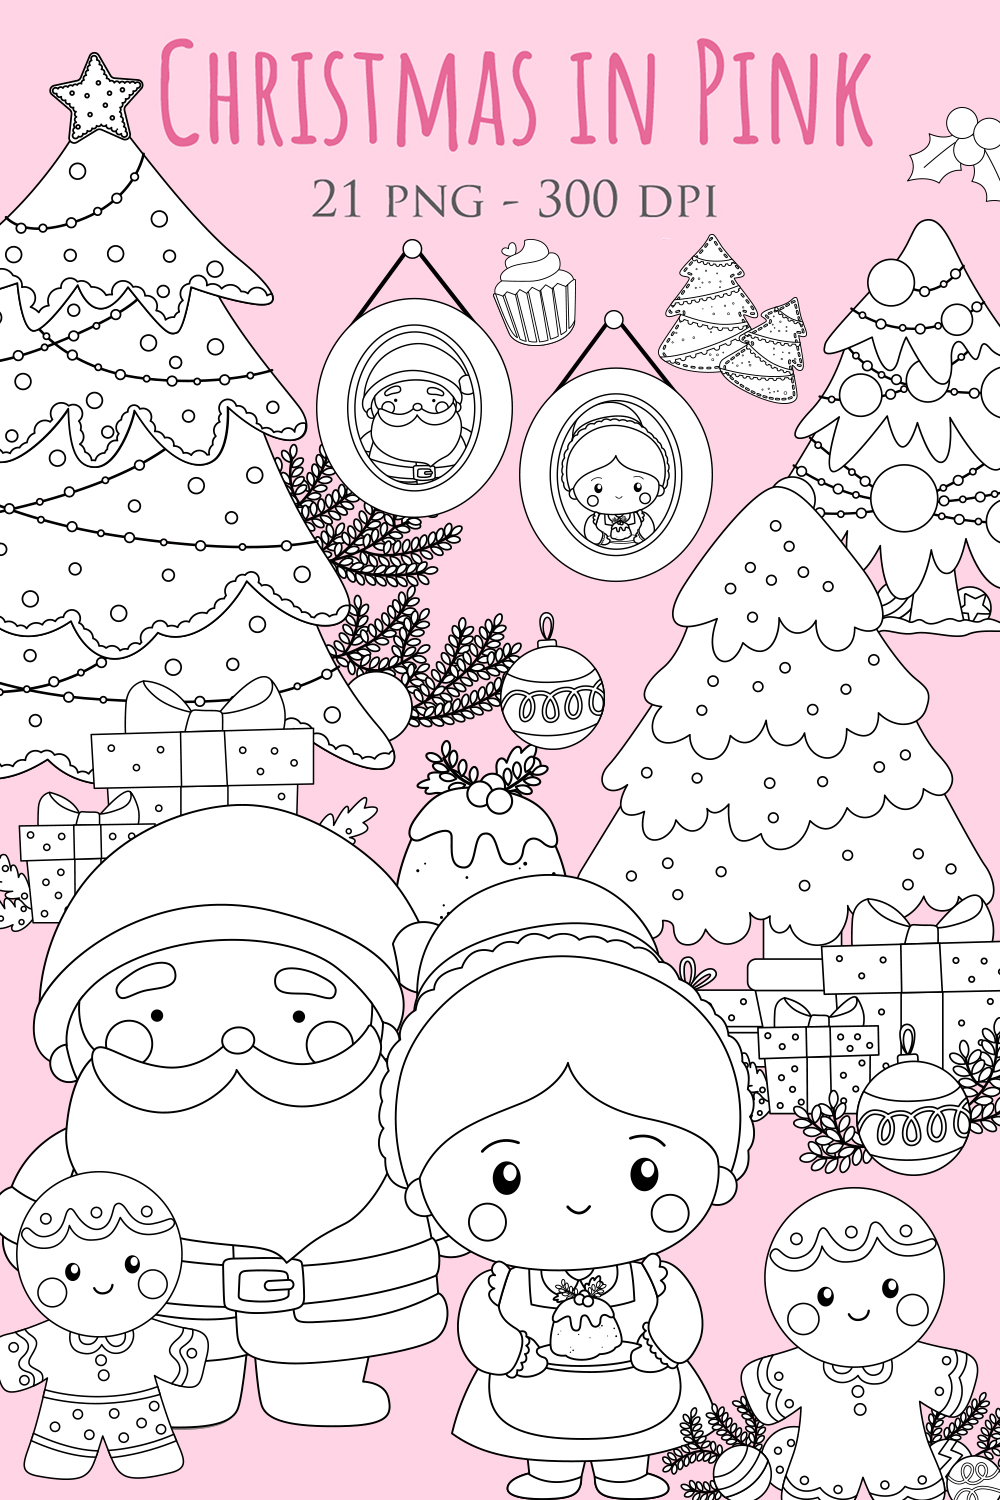 Cute Christmas in Pink Decoration Background Ornaments Accessories Tree Santa Claus Gingerbread Grandmother Character Cartoon Digital Stamp Outline pinterest preview image.